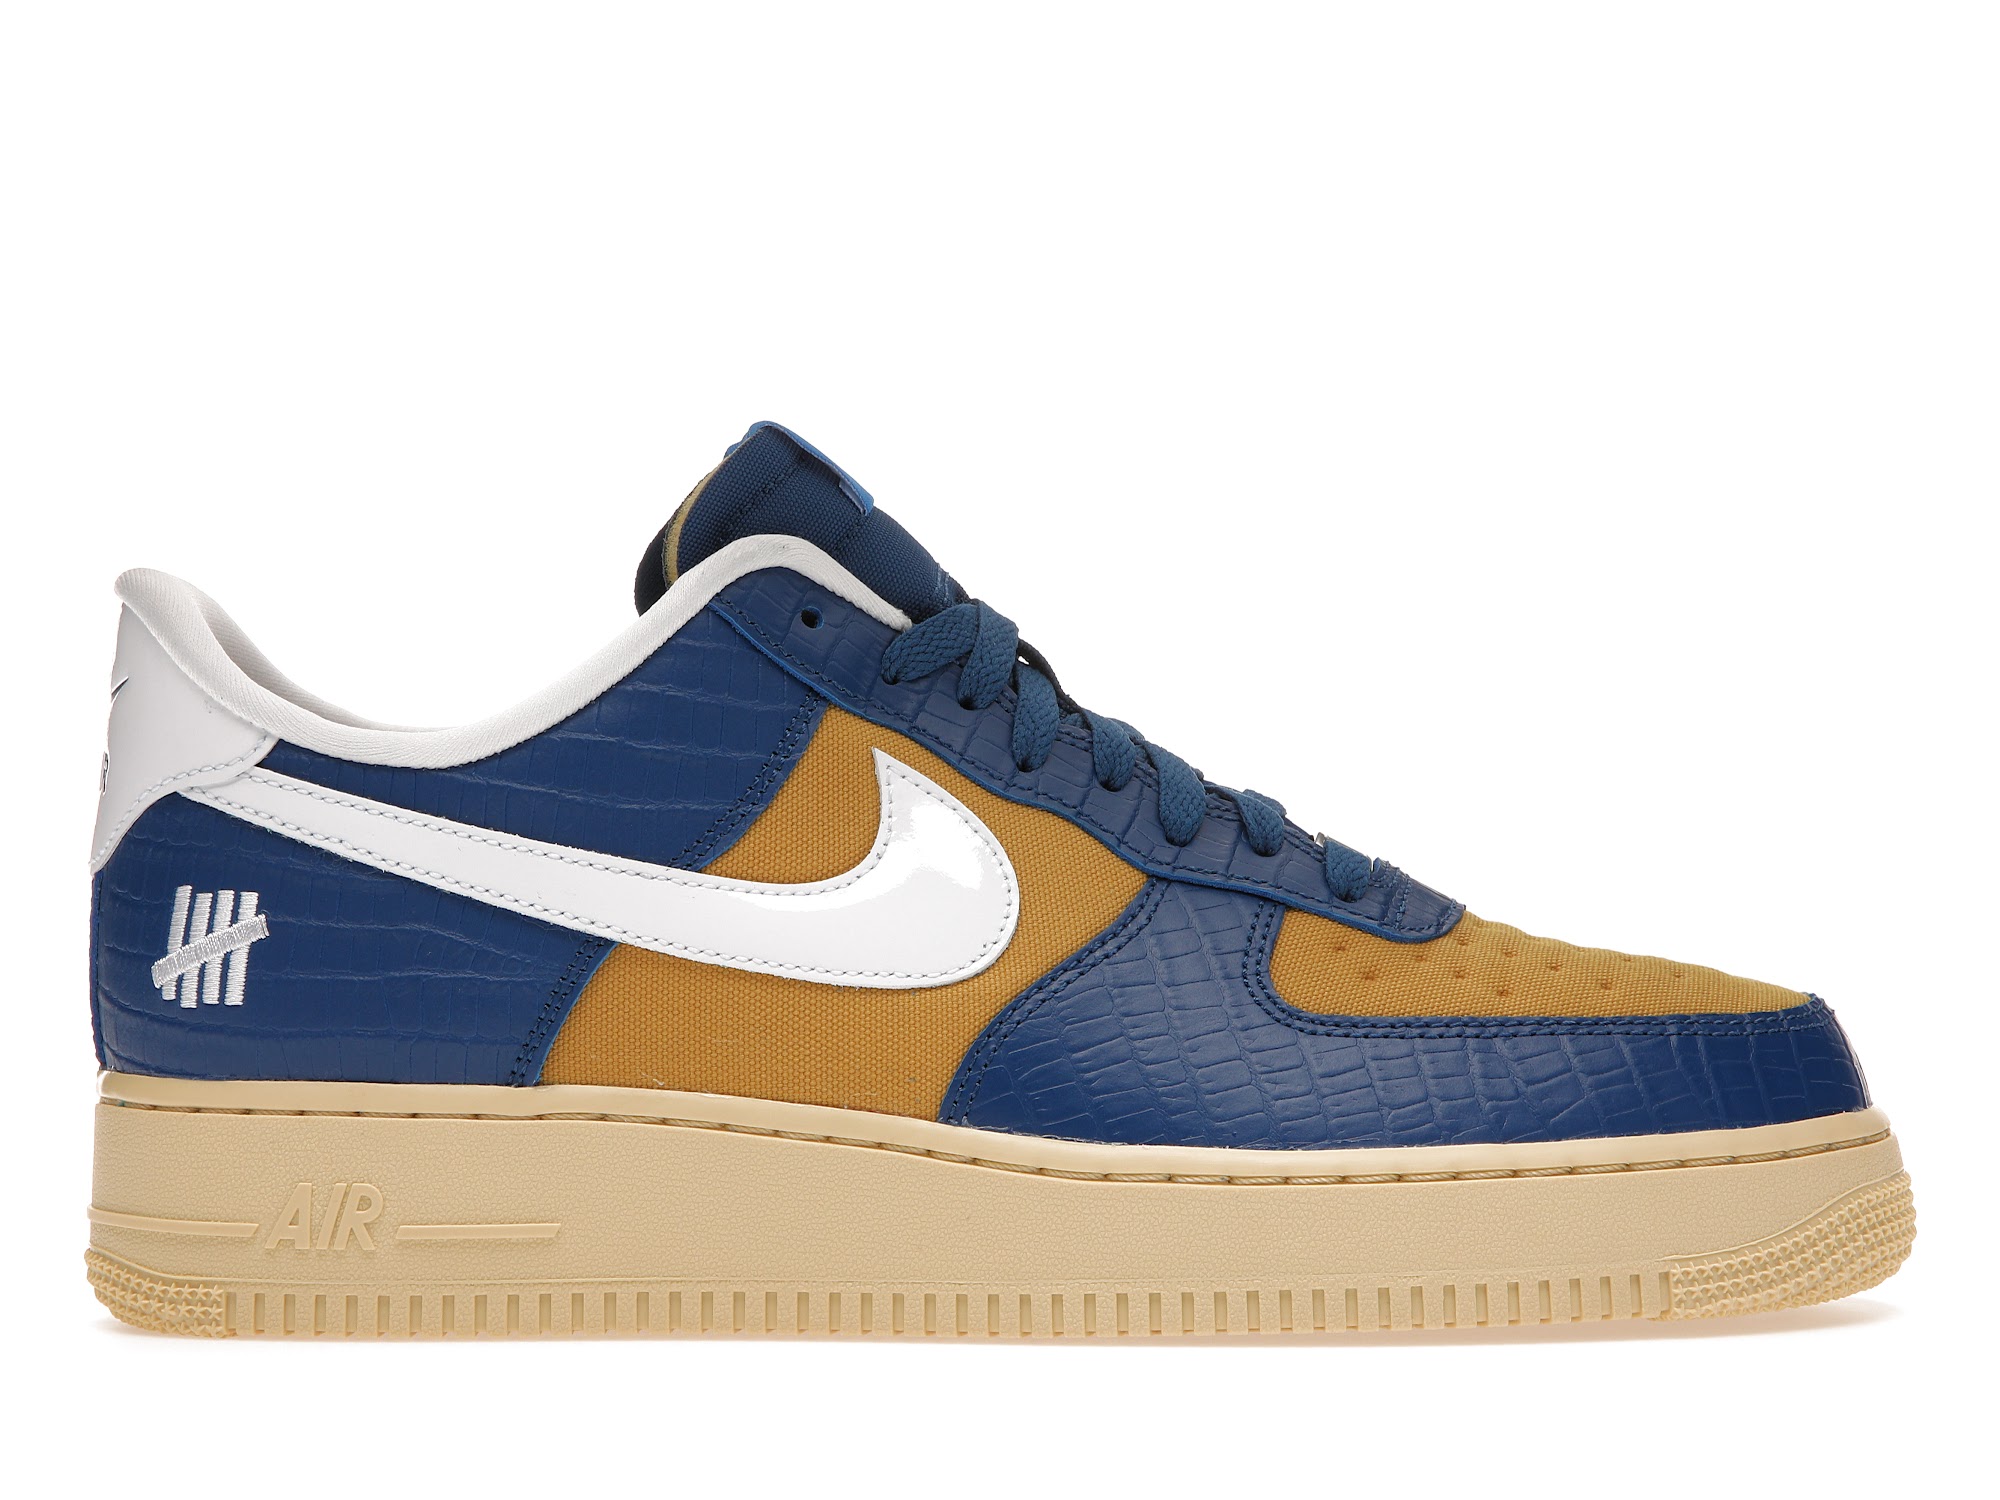 NIKE AIR FORCE 1 LOW SP UNDEFEATED(送料込み)